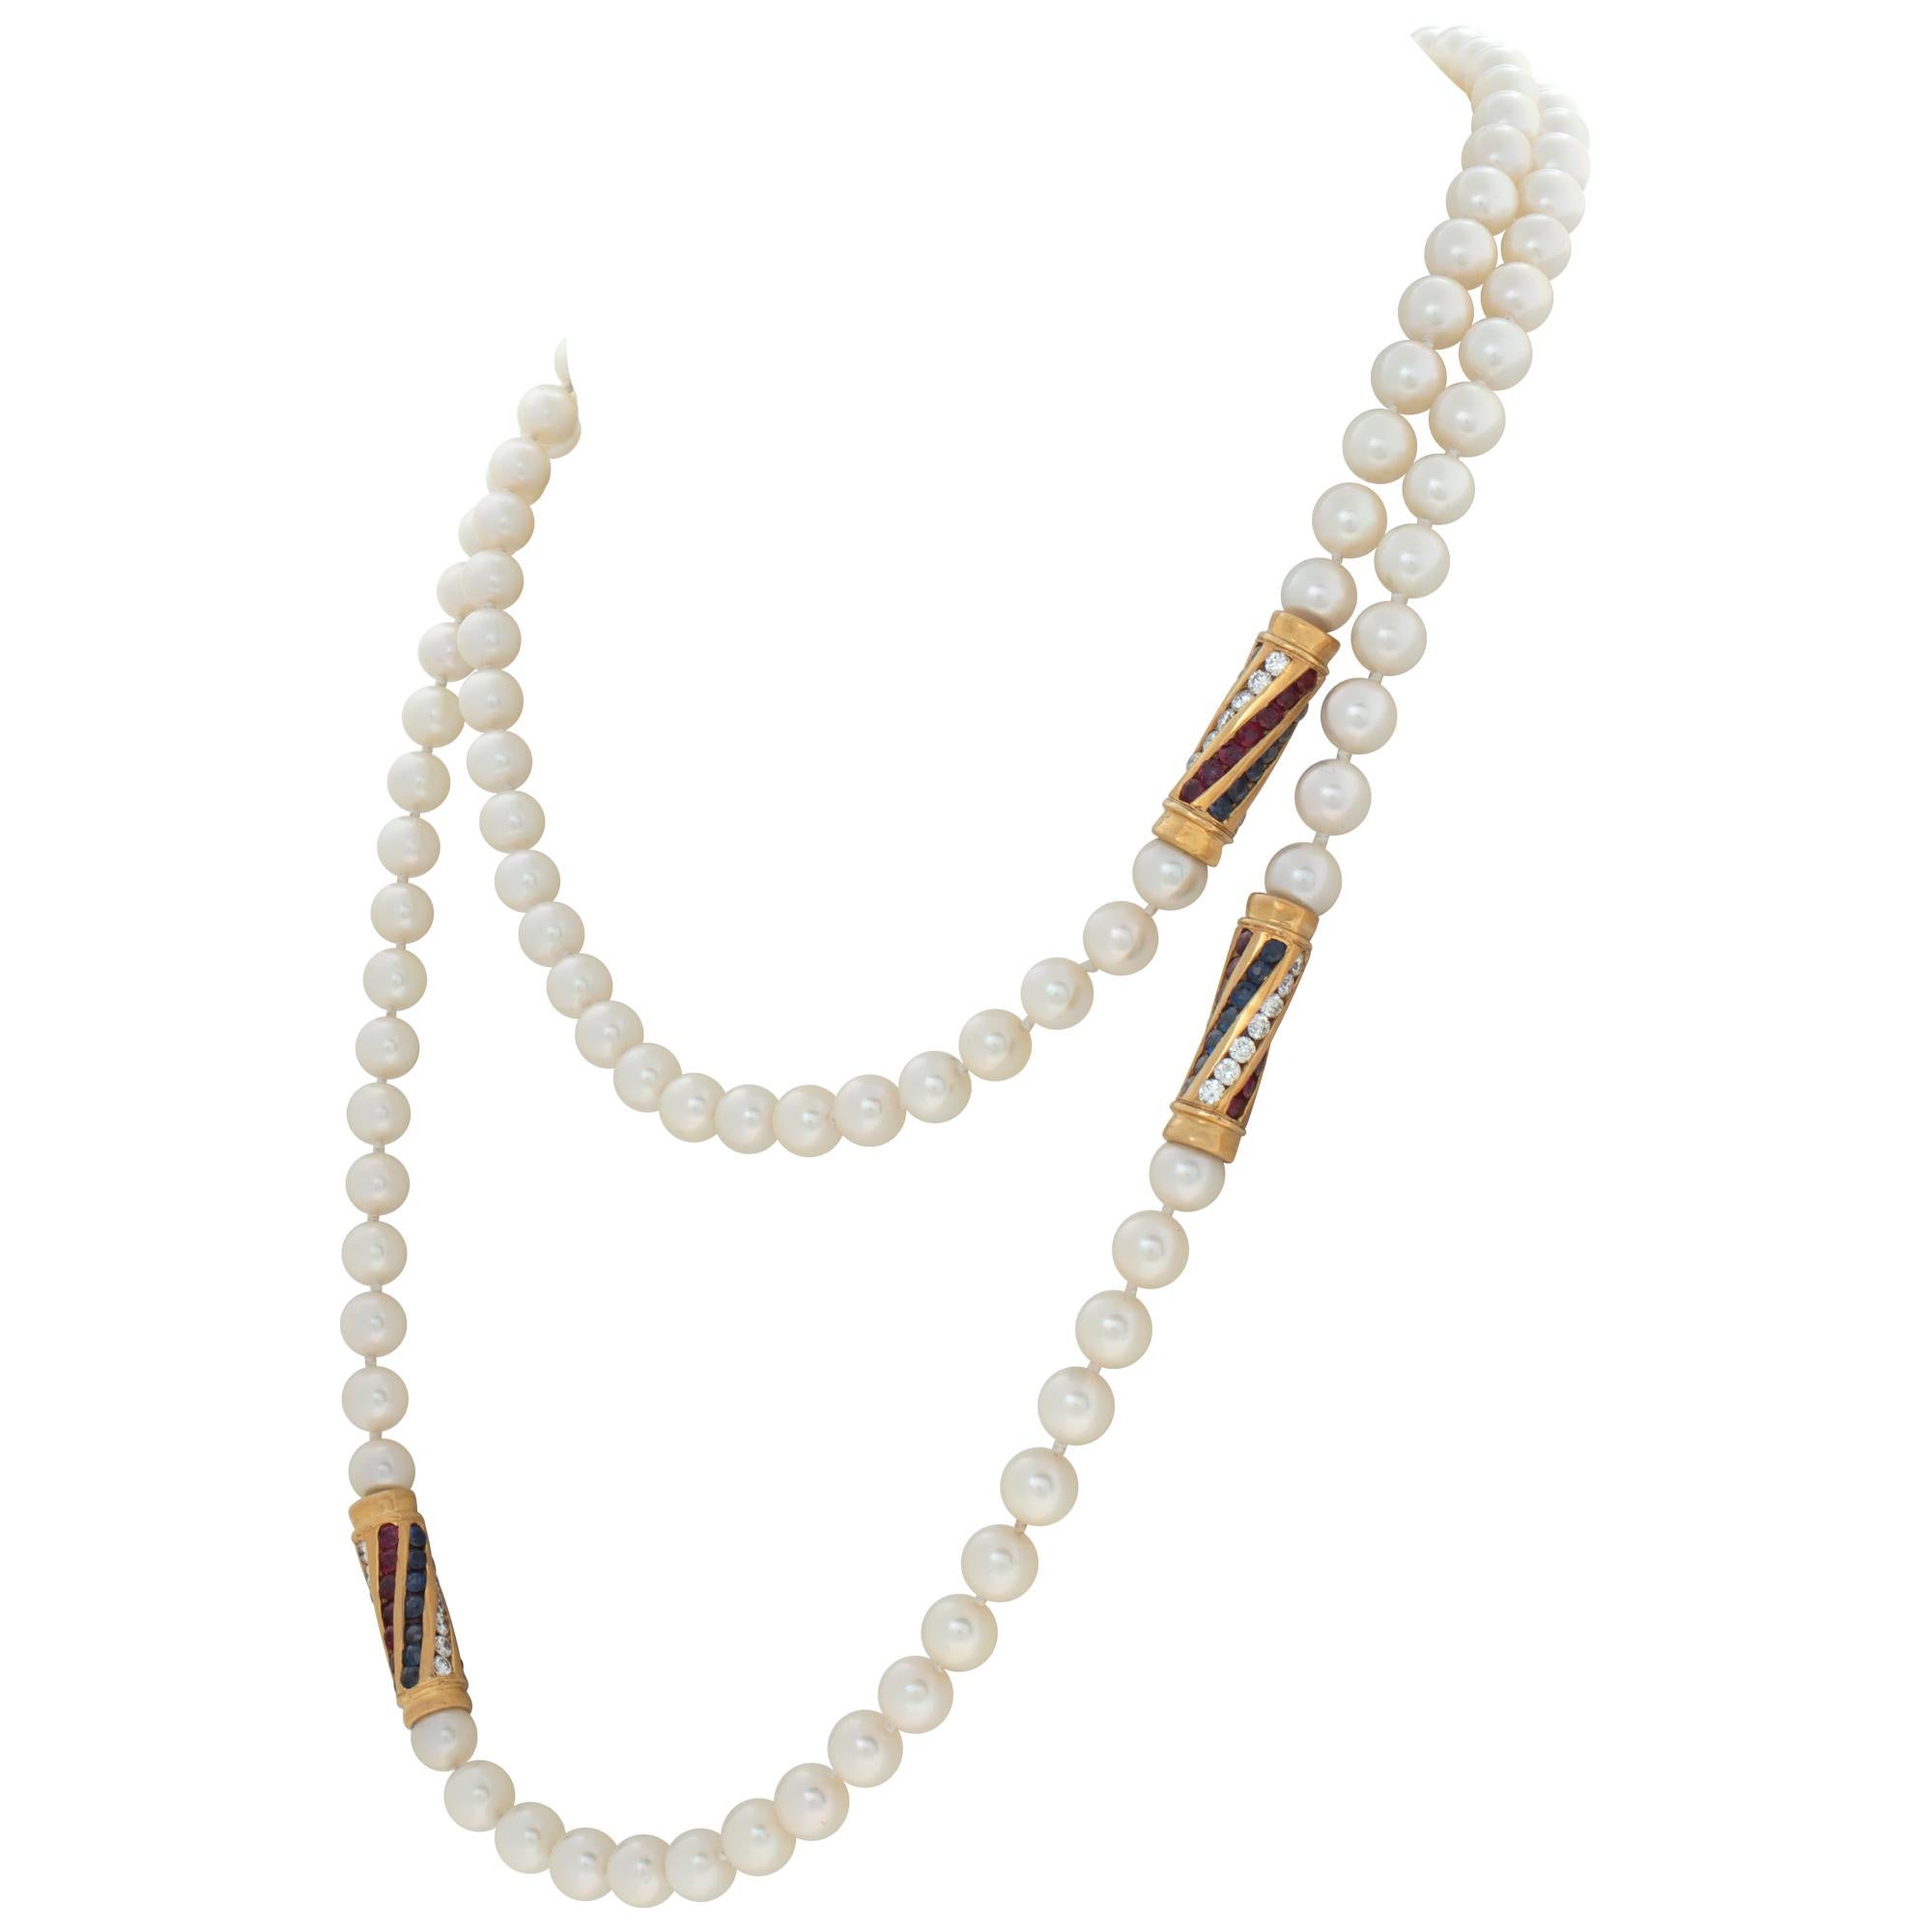 Opera length (36 inches) 6 x 6.5mm Akoya pearls necklace with four gold stations swirling with diamonds, rubies and sapphires set in 18K yellow gold to complete the glamour look. Diamonds approx. carat weight 2 carats G-H color, VS clarity. Necklace